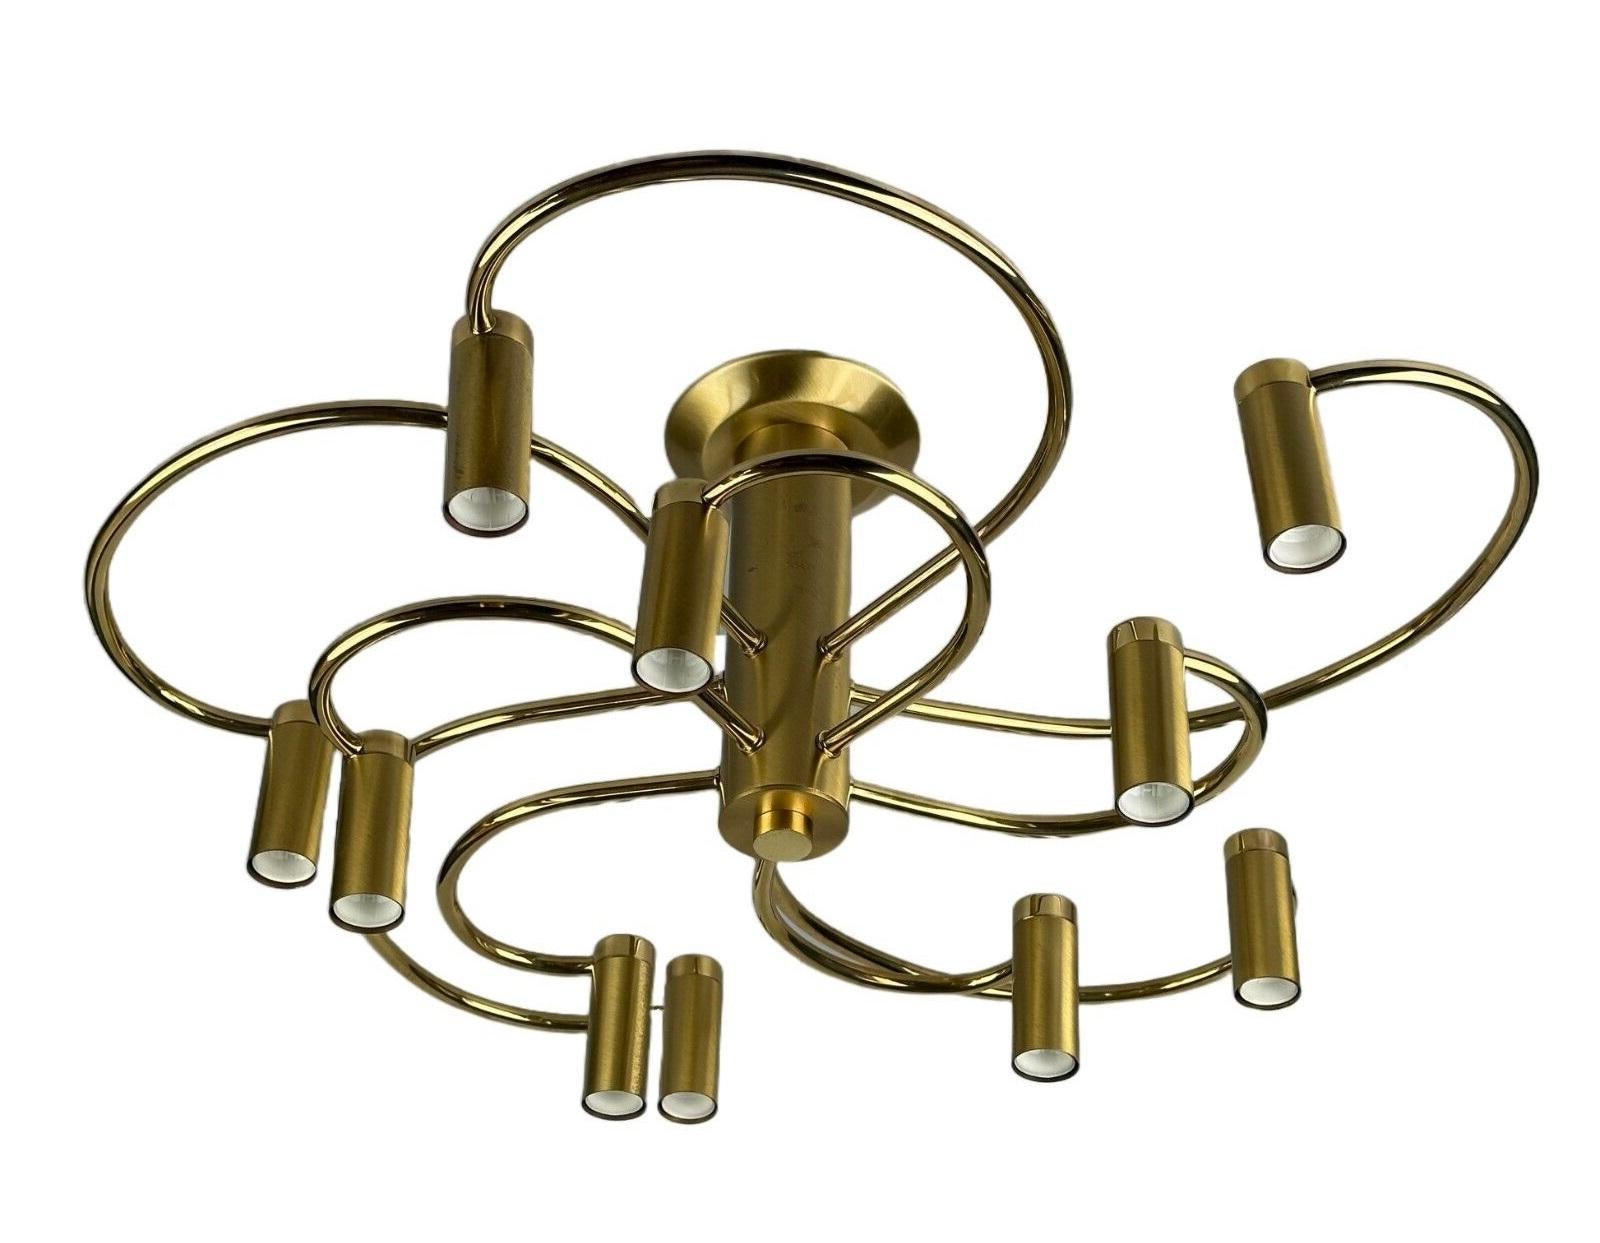 70s 80s Sputnik ceiling lamp by Vielhaber Leuchten Germany brass

Object: ceiling lamp

Manufacturer: Vielhaber lights

Condition: good

Age: around 1970-1980

Dimensions:

Width = 63cm
Depth = 63cm
Height = 26cm

Other notes:

10x E14 socket

The